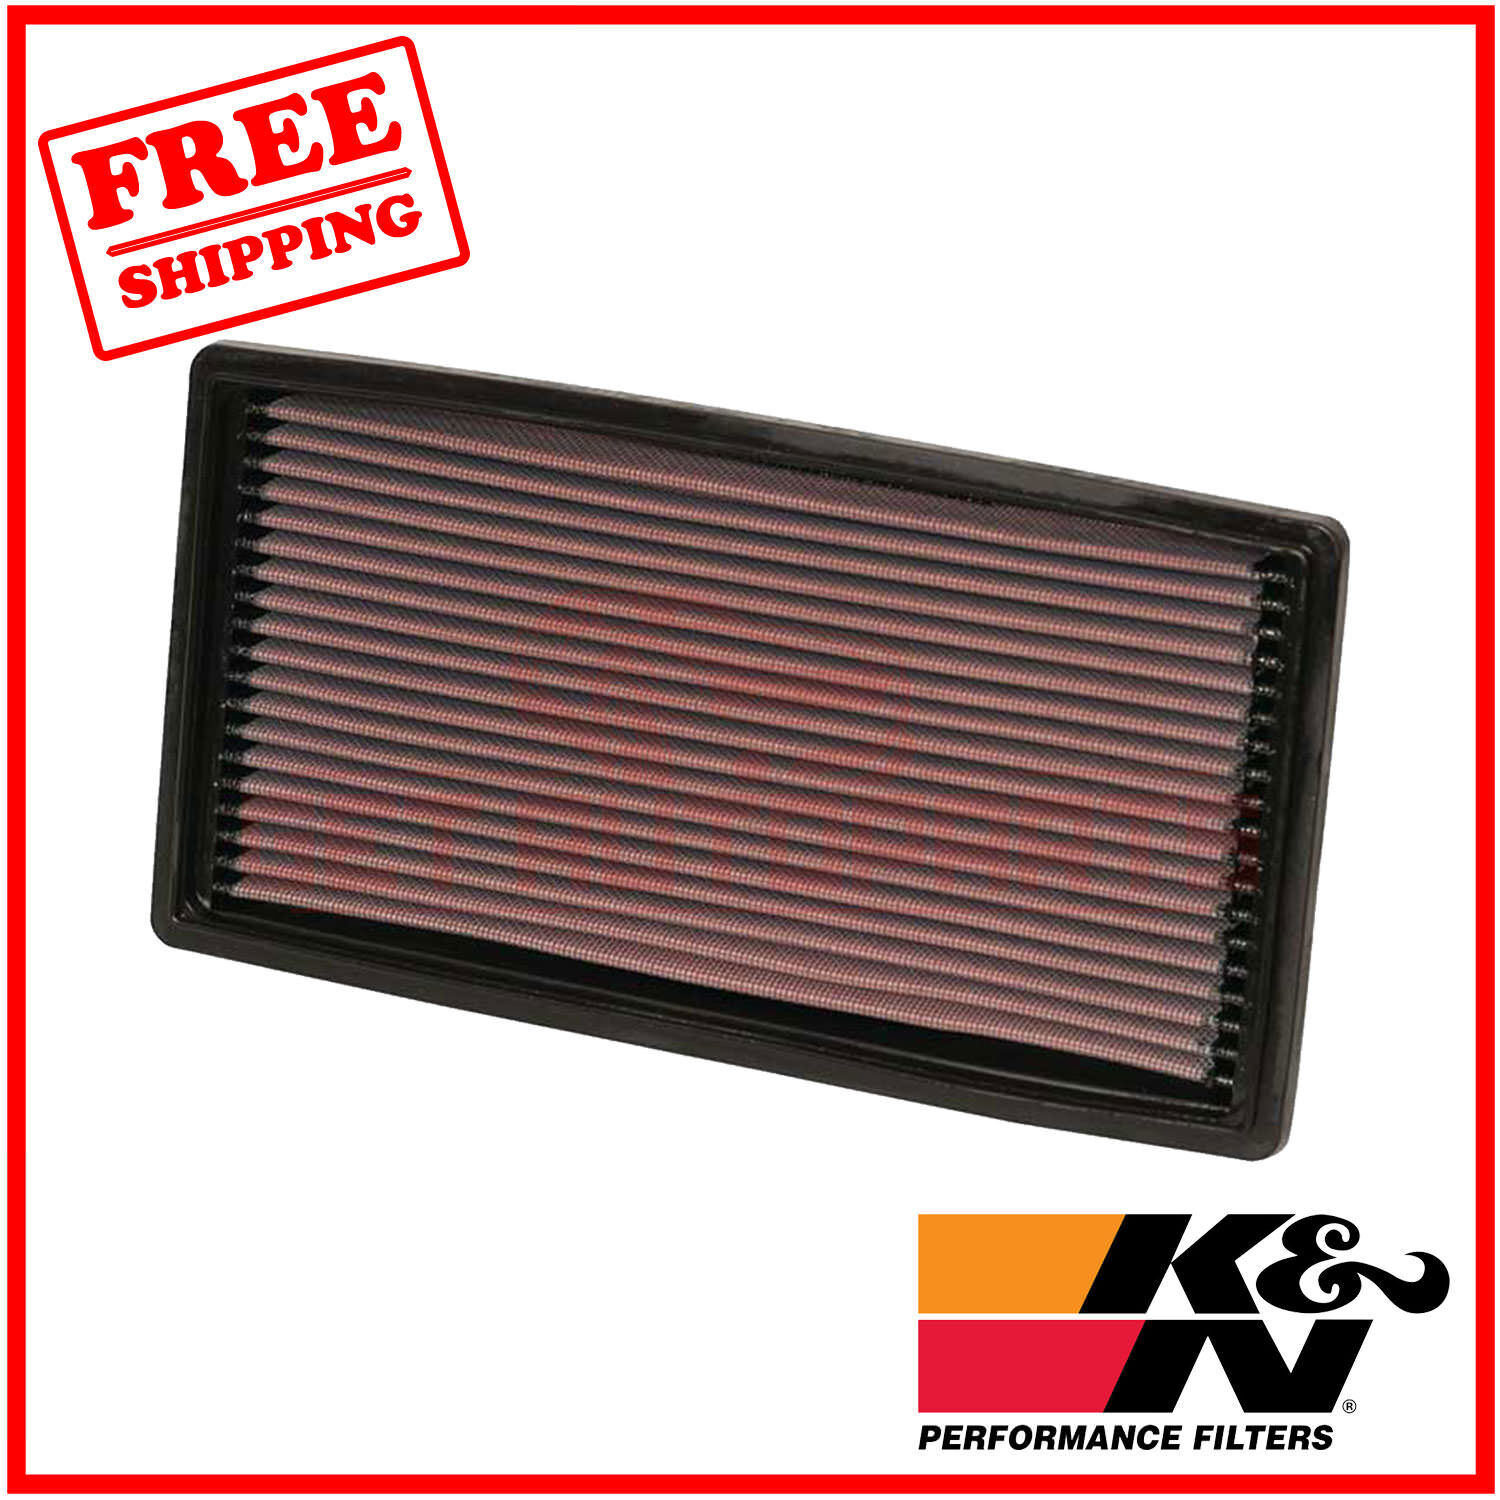 K&N Replacement Air Filter for Chevrolet Blazer 1995-2005